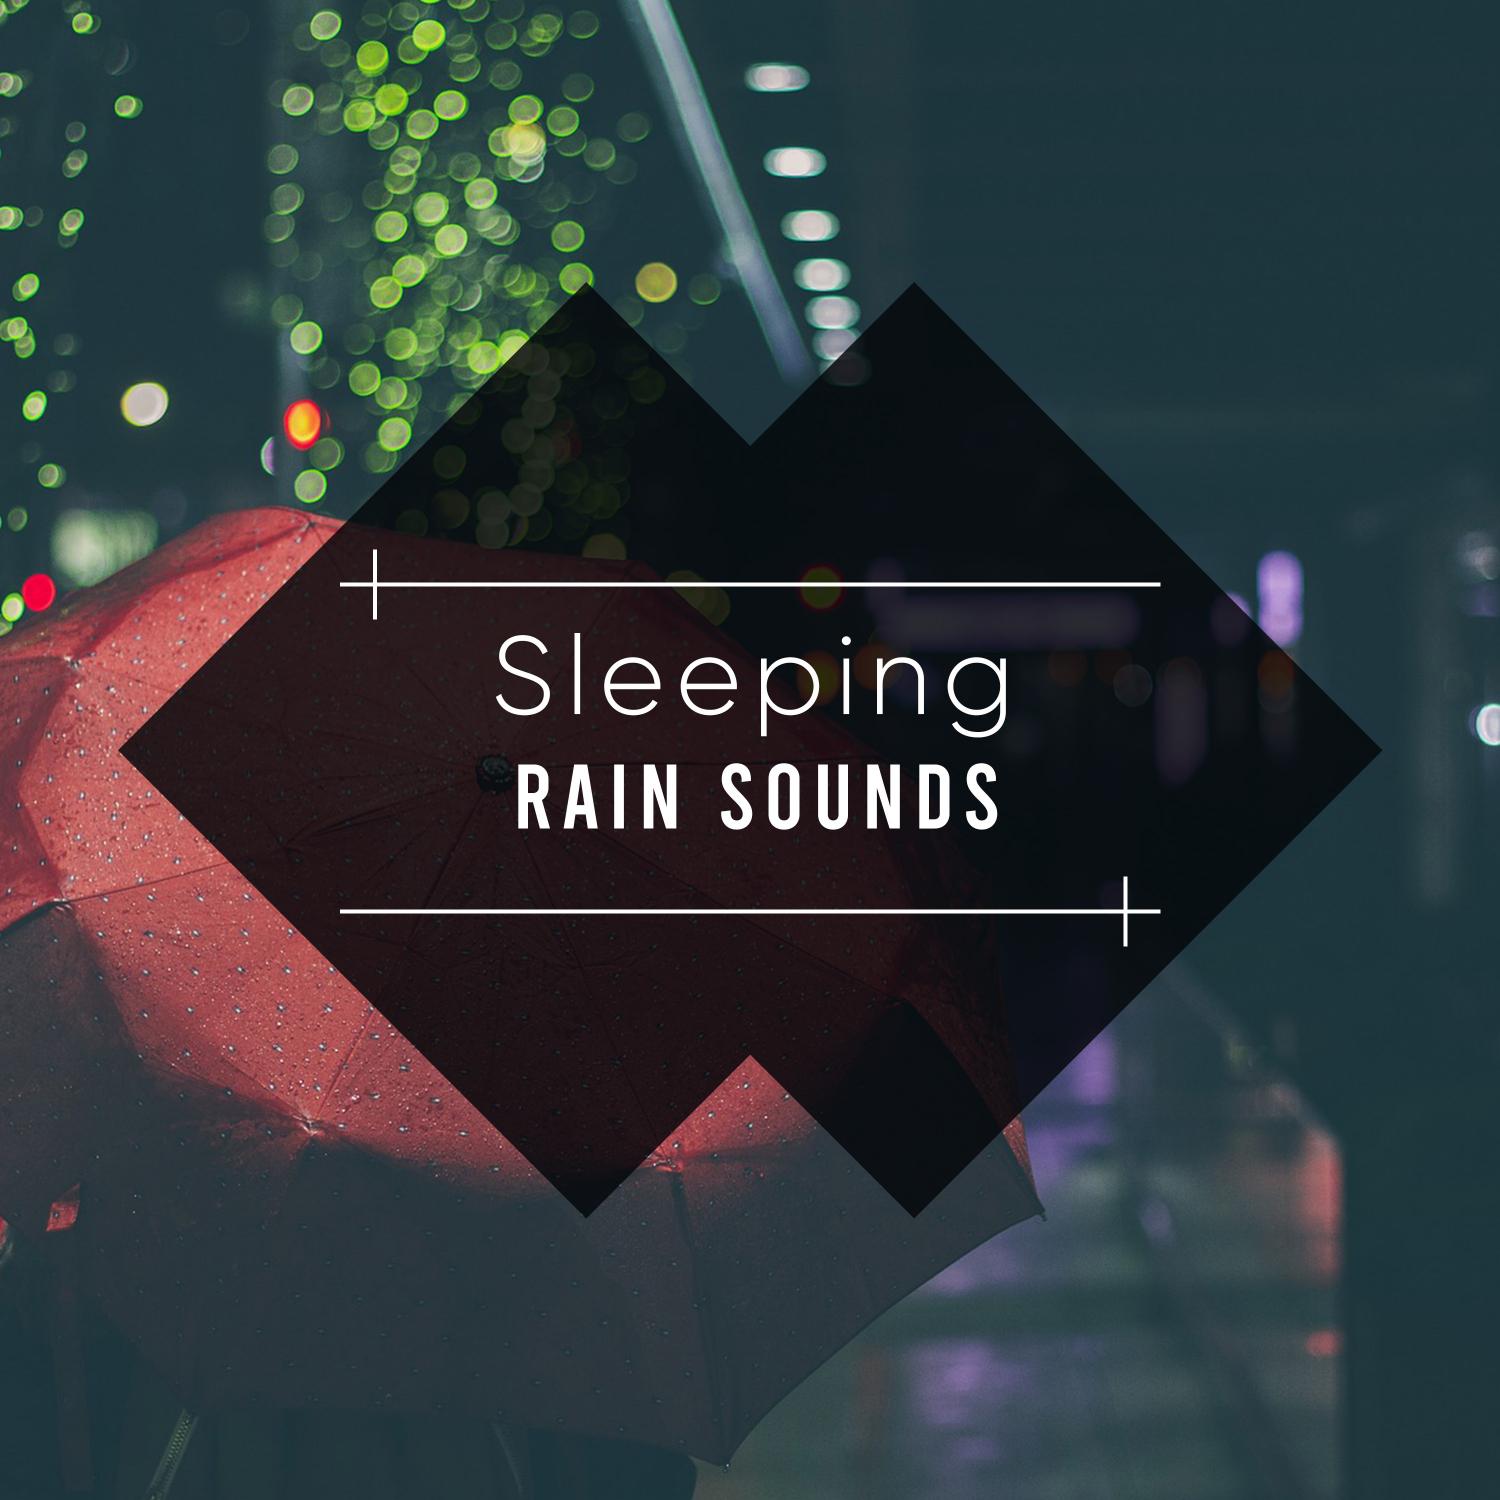 15 Sleep Sounds of Nature - Falling Rain and Trickling Rivers